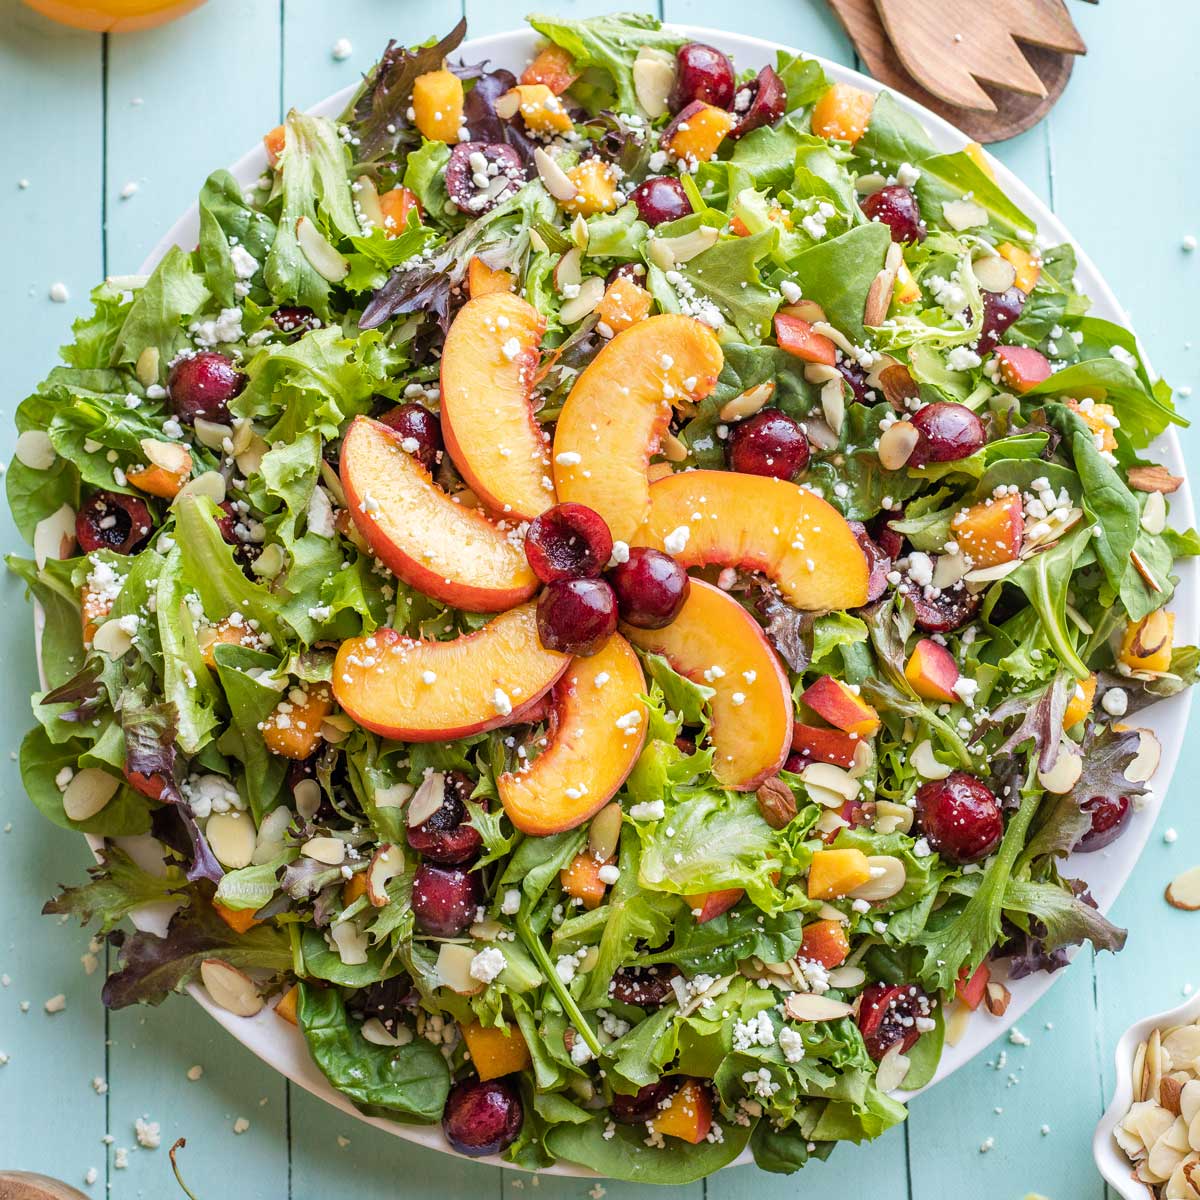 Finished salad on serving platter with sunshine made out of peaches decoratively at center.